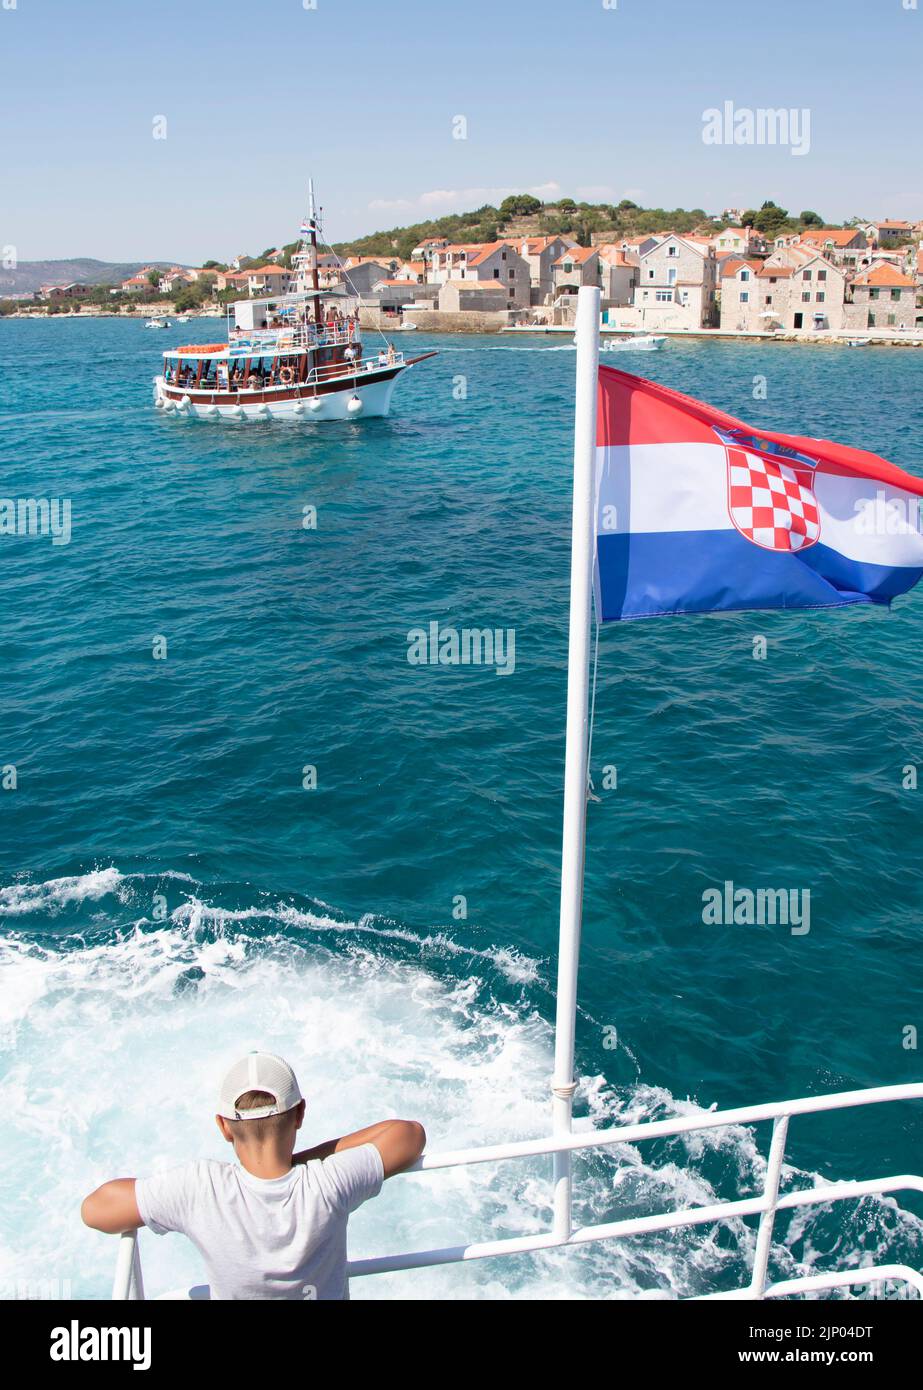 Prvic island, Croatia - July 22, 2022: One boy leaning on a fence of a boat with Croatian flag, watching the sea, passenger boat on daily excursion an Stock Photo